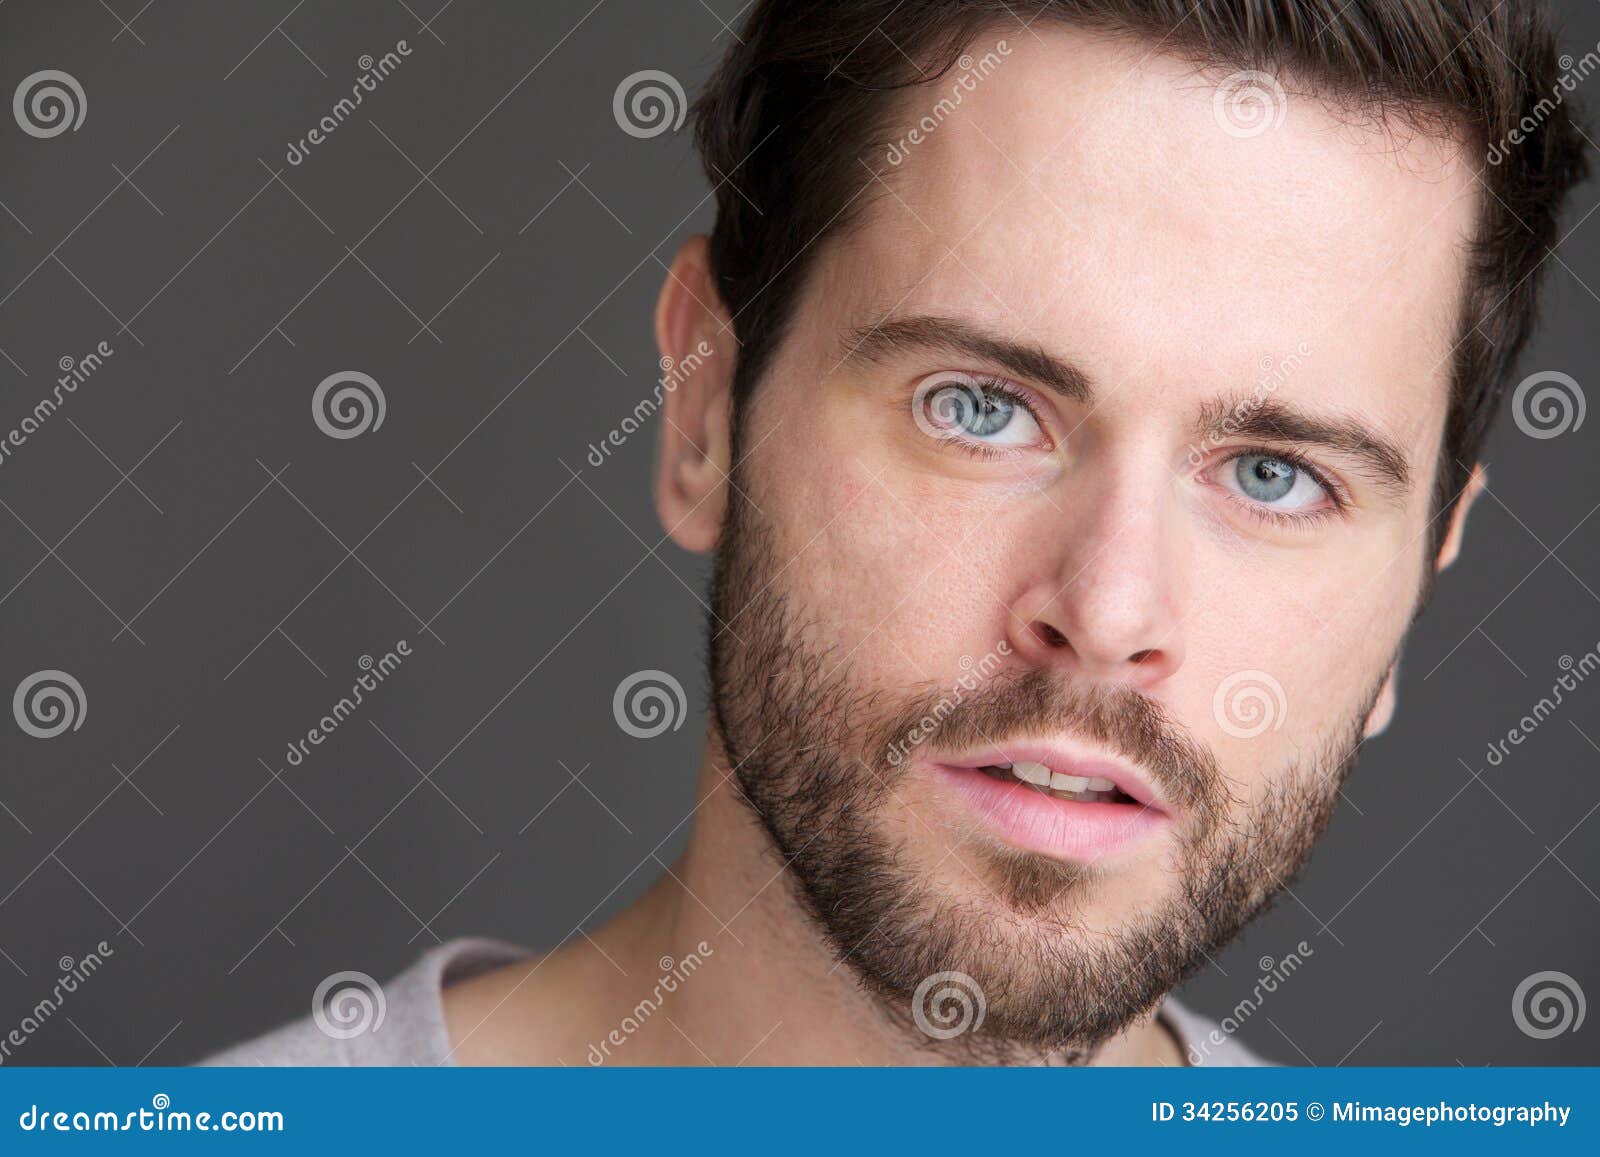 Blue-eyed man with dark hair and beard - wide 8